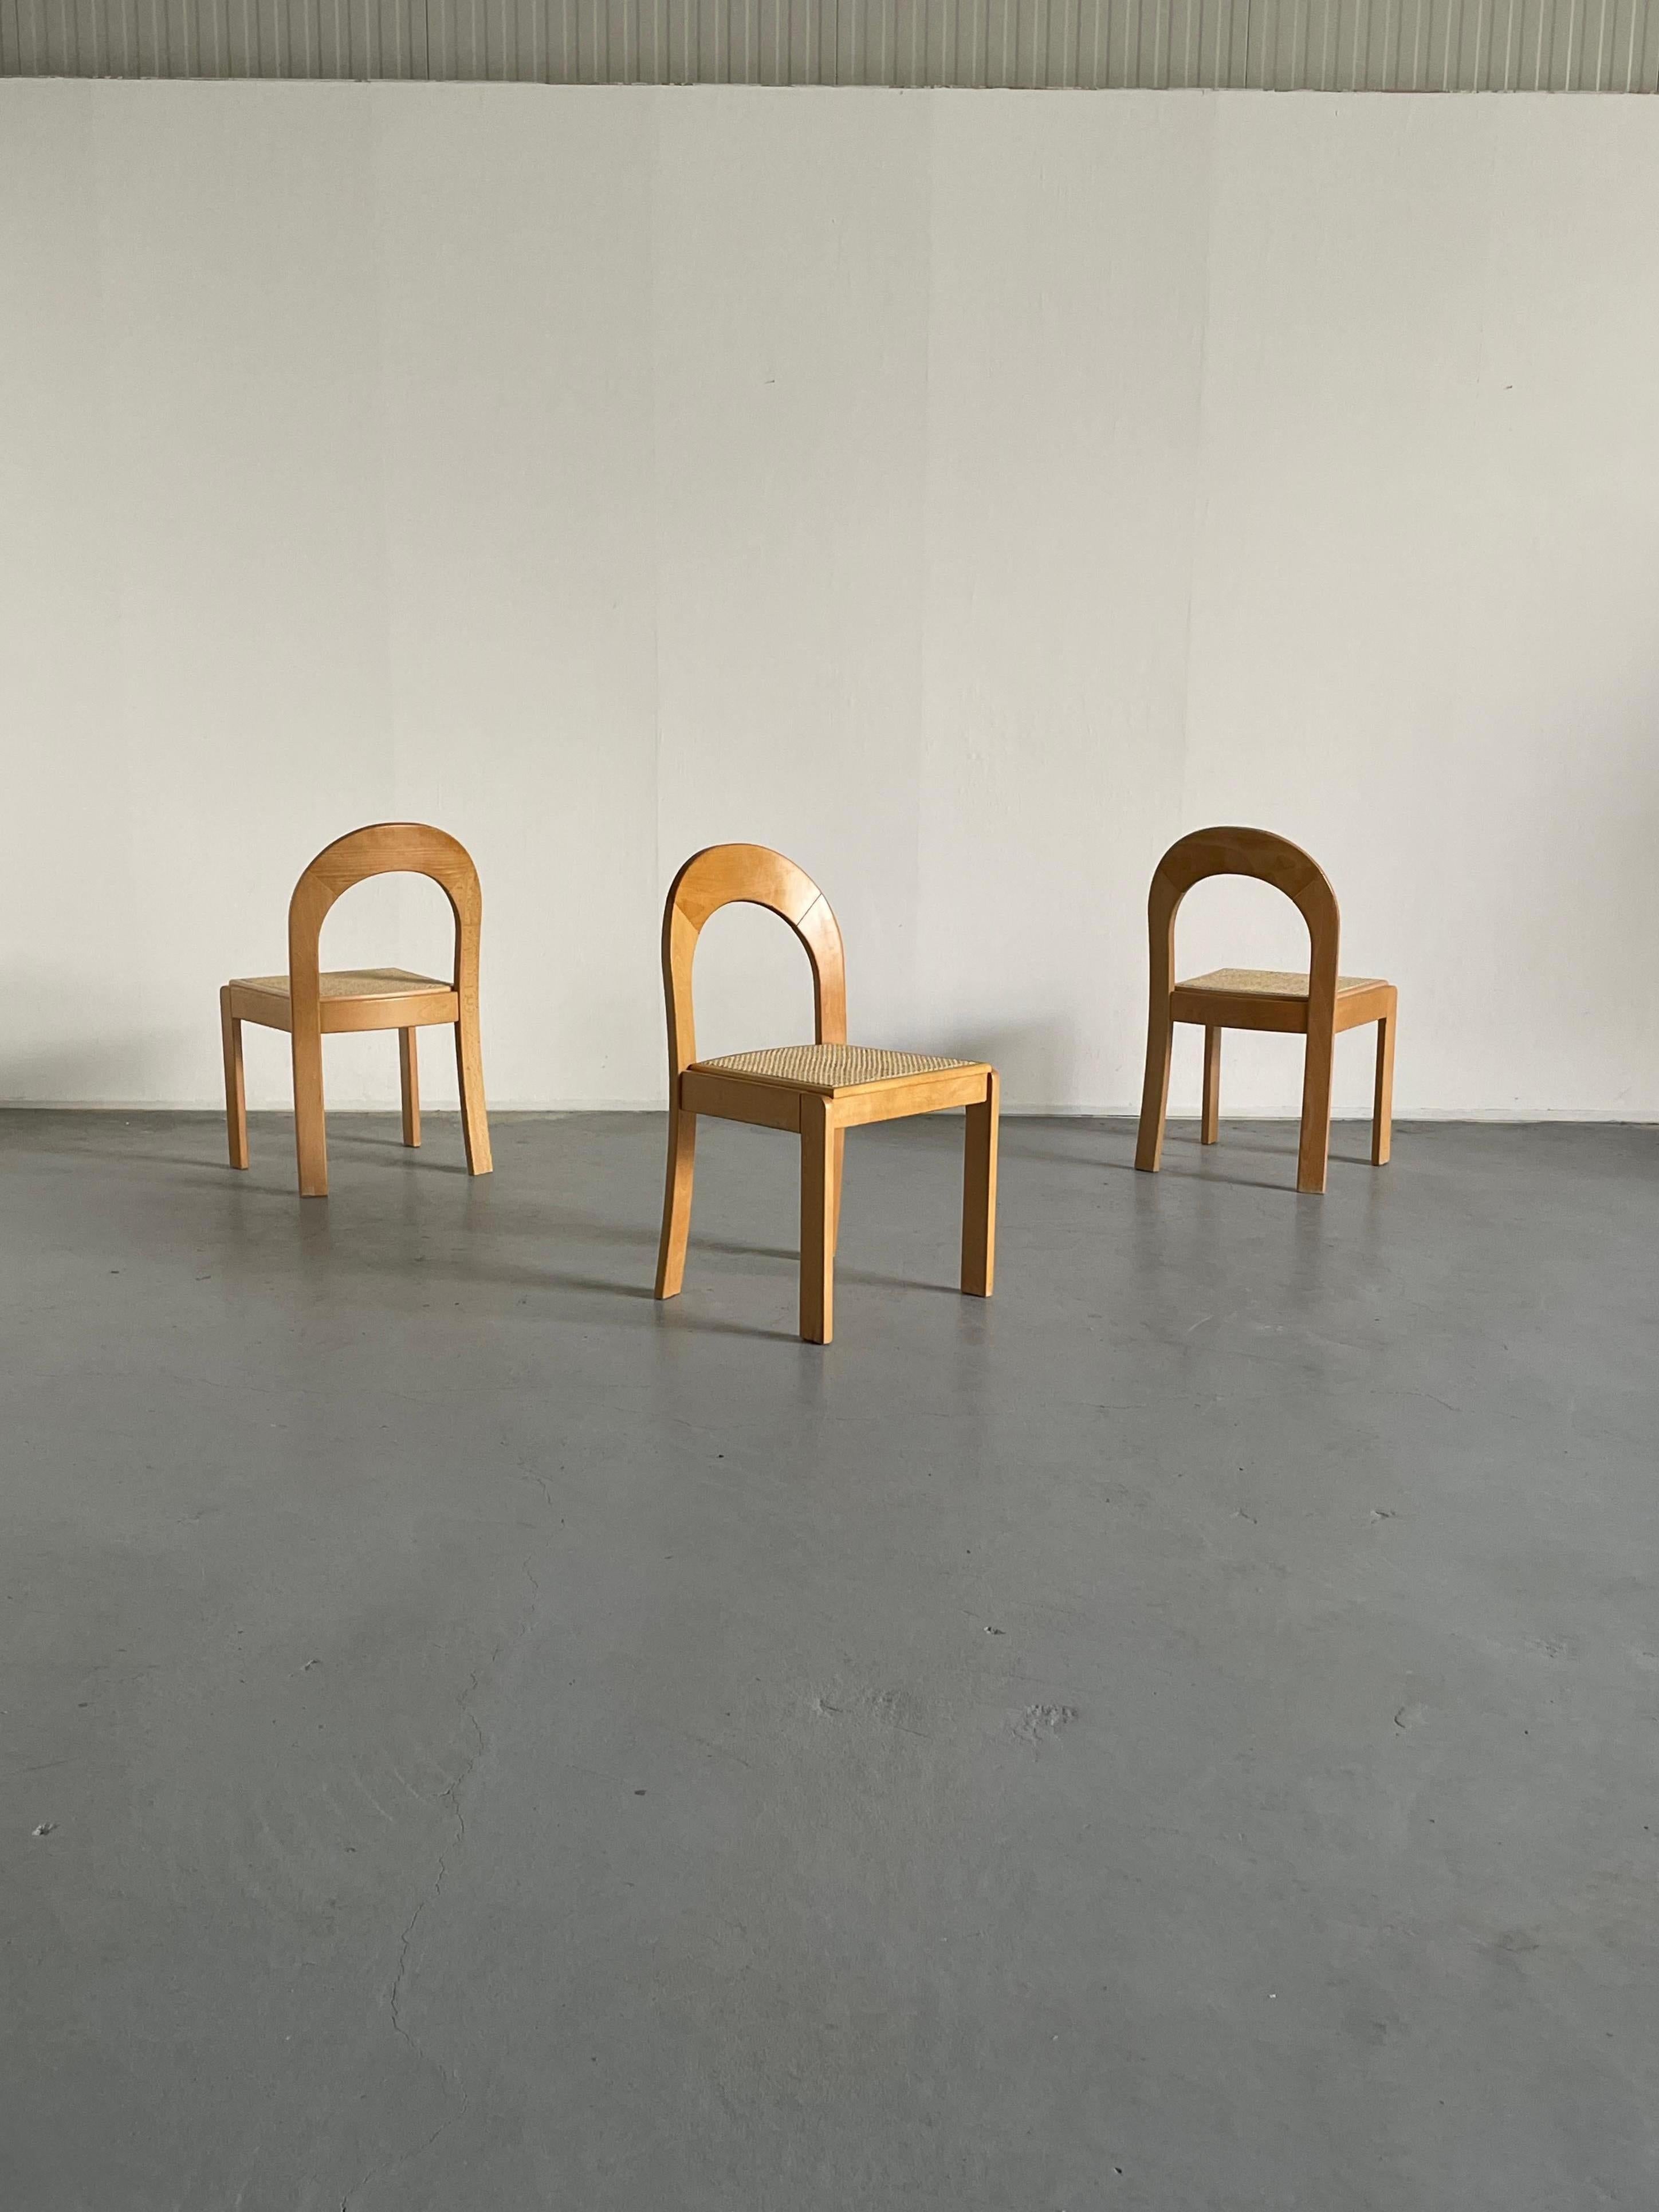 Three stunning Italian modernist sculptural dining chairs attributed to Tagliabue di Cascina Armata, a small Italian furniture maker in the 1970s and 1980s.

Price is per piece.
Three pieces available.

In very good vintage condition with expected